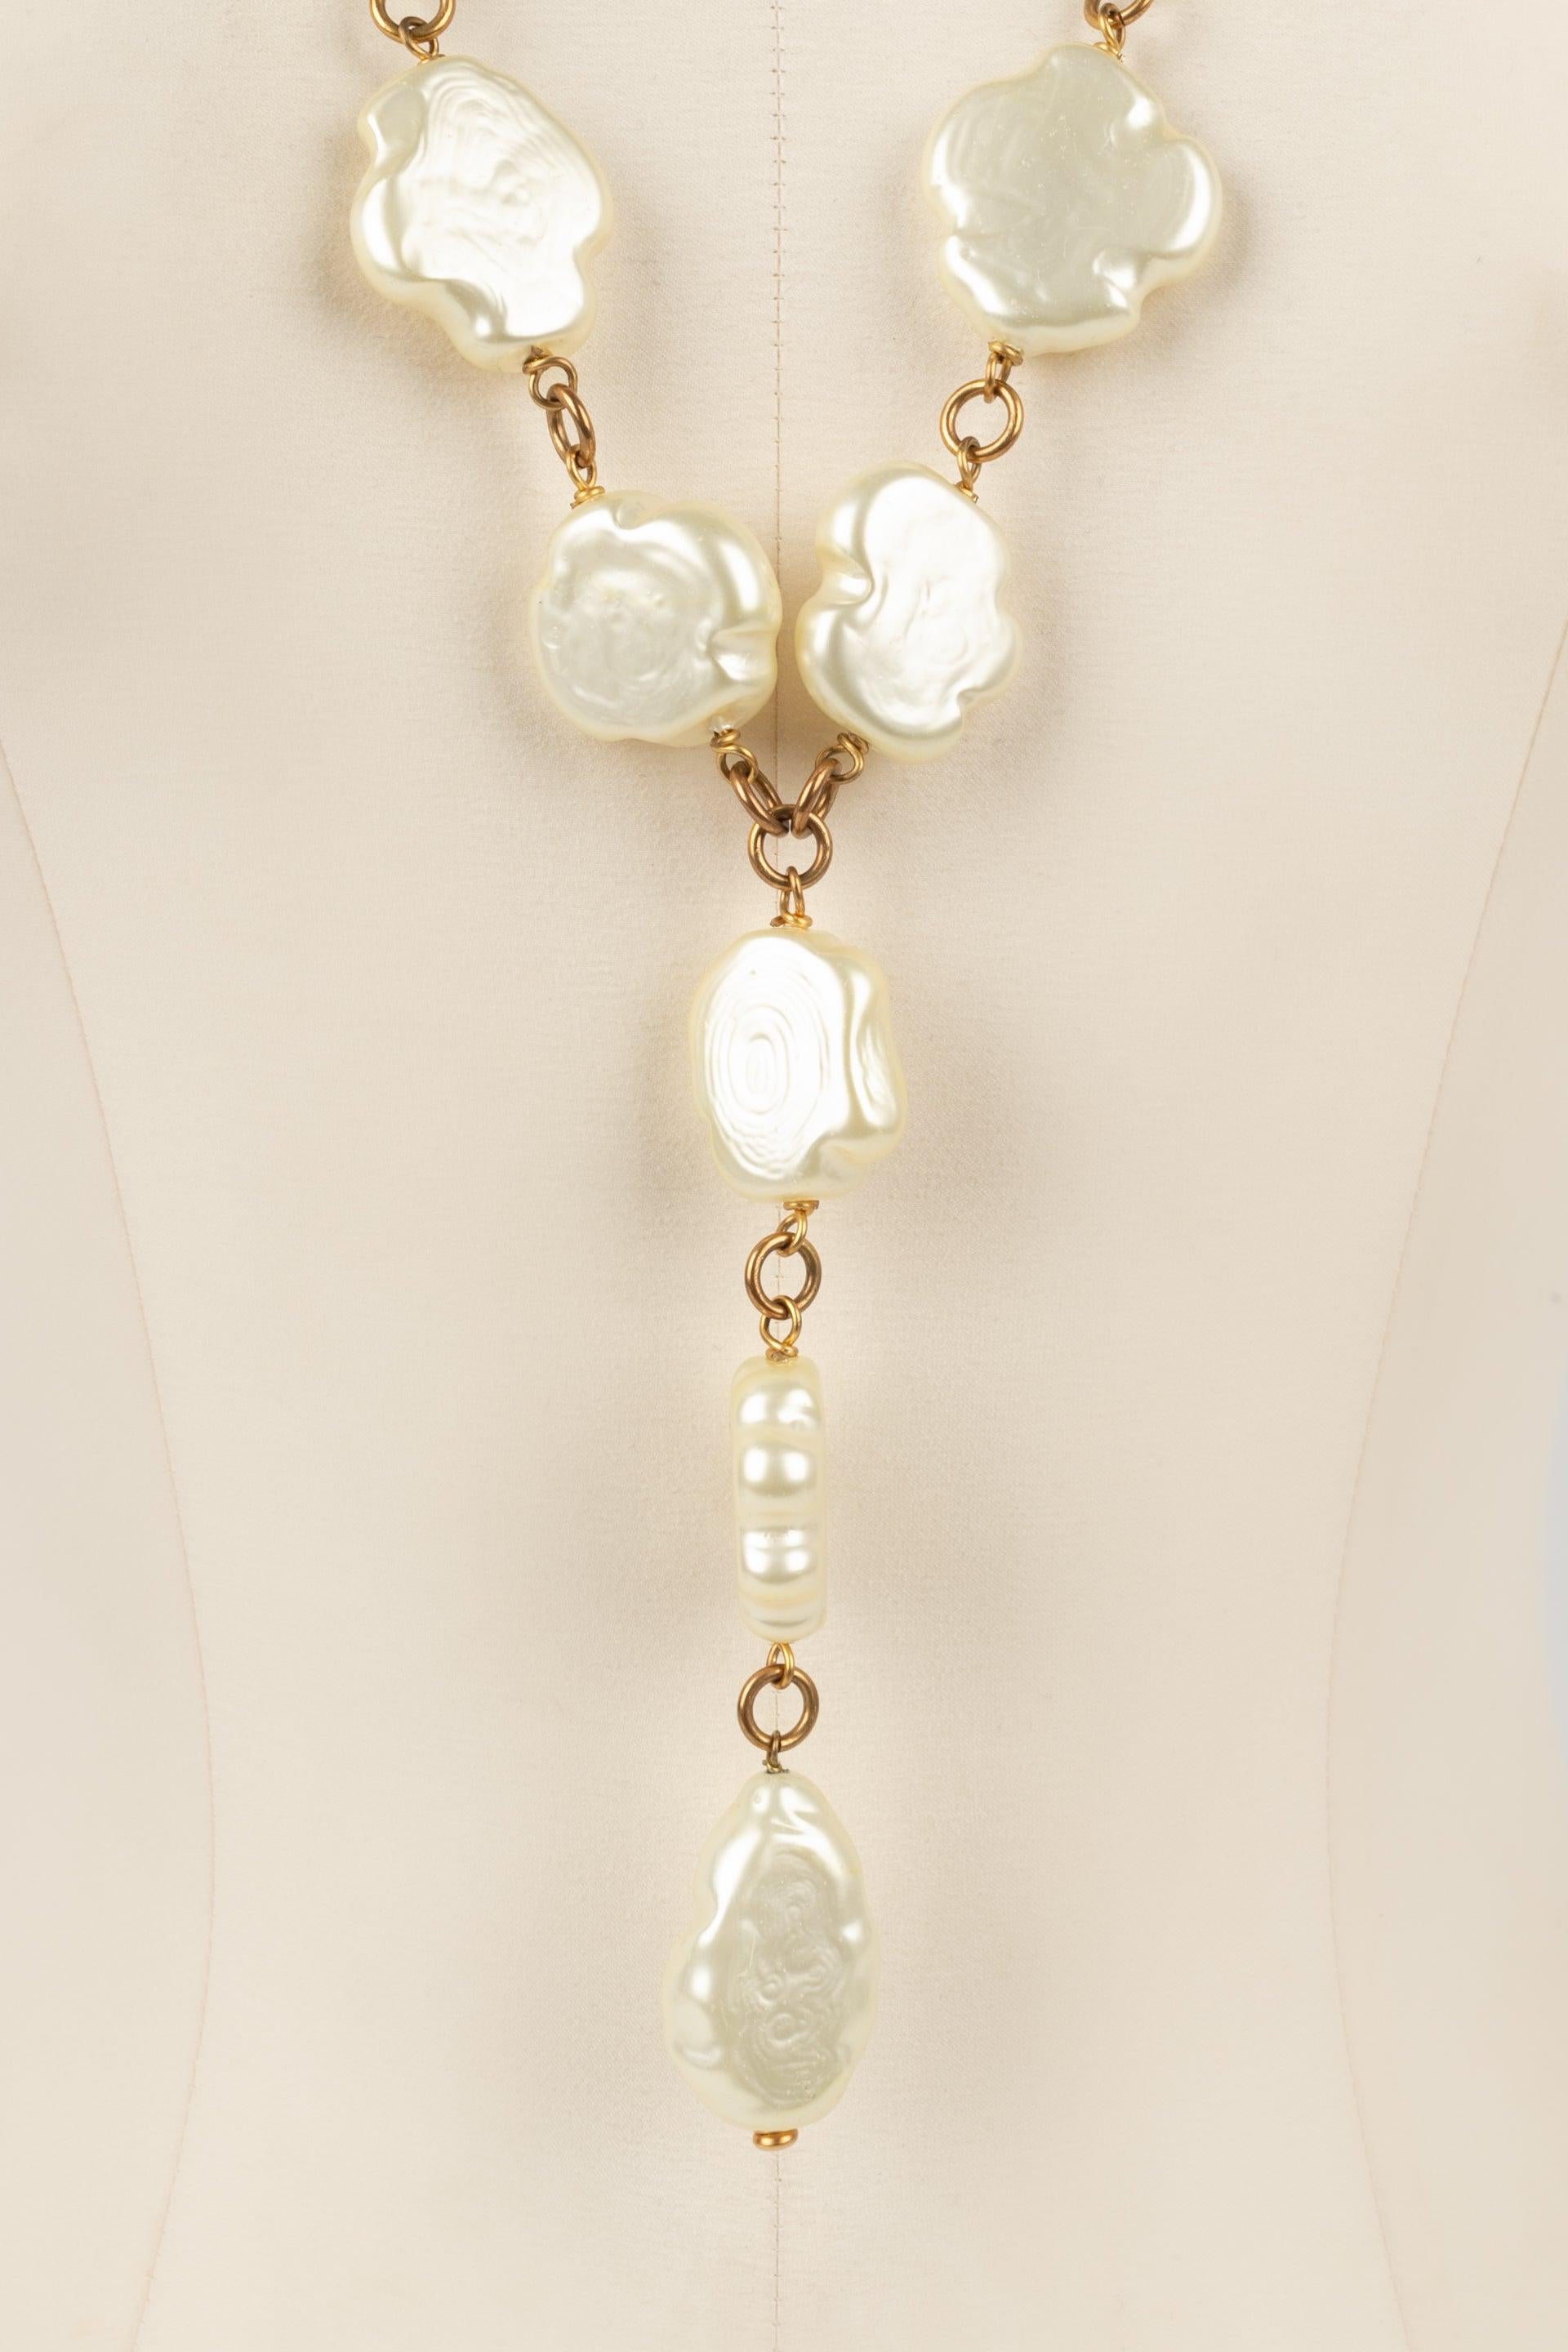 Chanel Costume Pearl Necklace with a Baroque Design In Excellent Condition For Sale In SAINT-OUEN-SUR-SEINE, FR